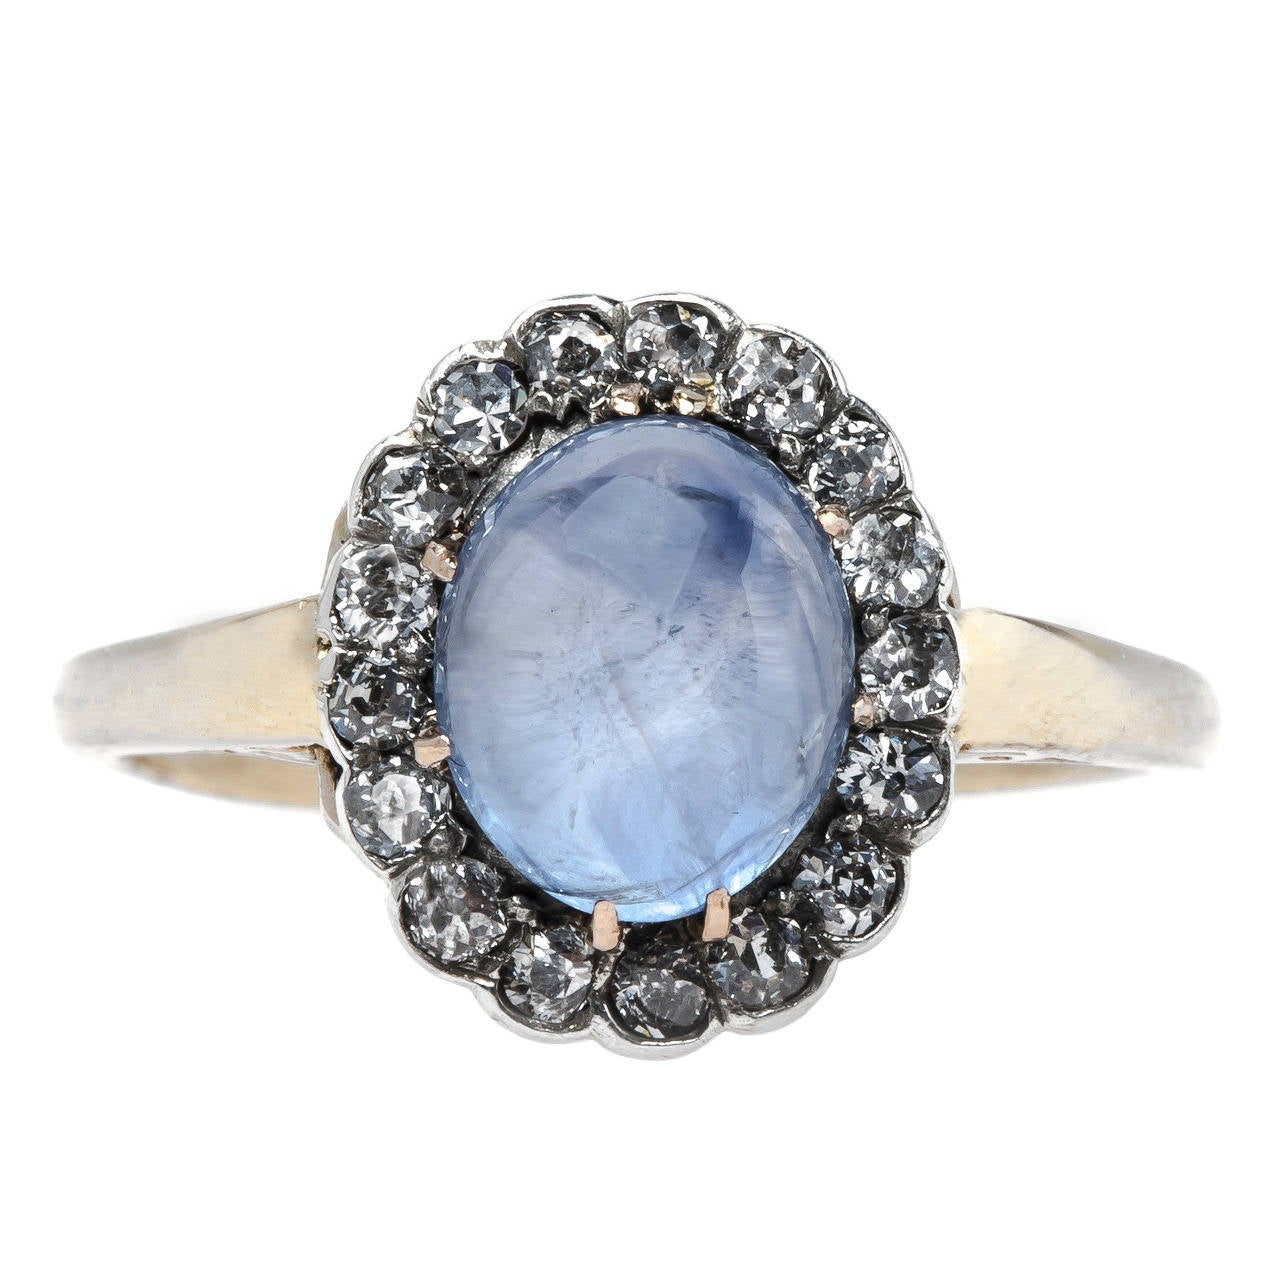 Dreamy Oval Cabochon Sapphire Engagement Ring with Diamond Halo